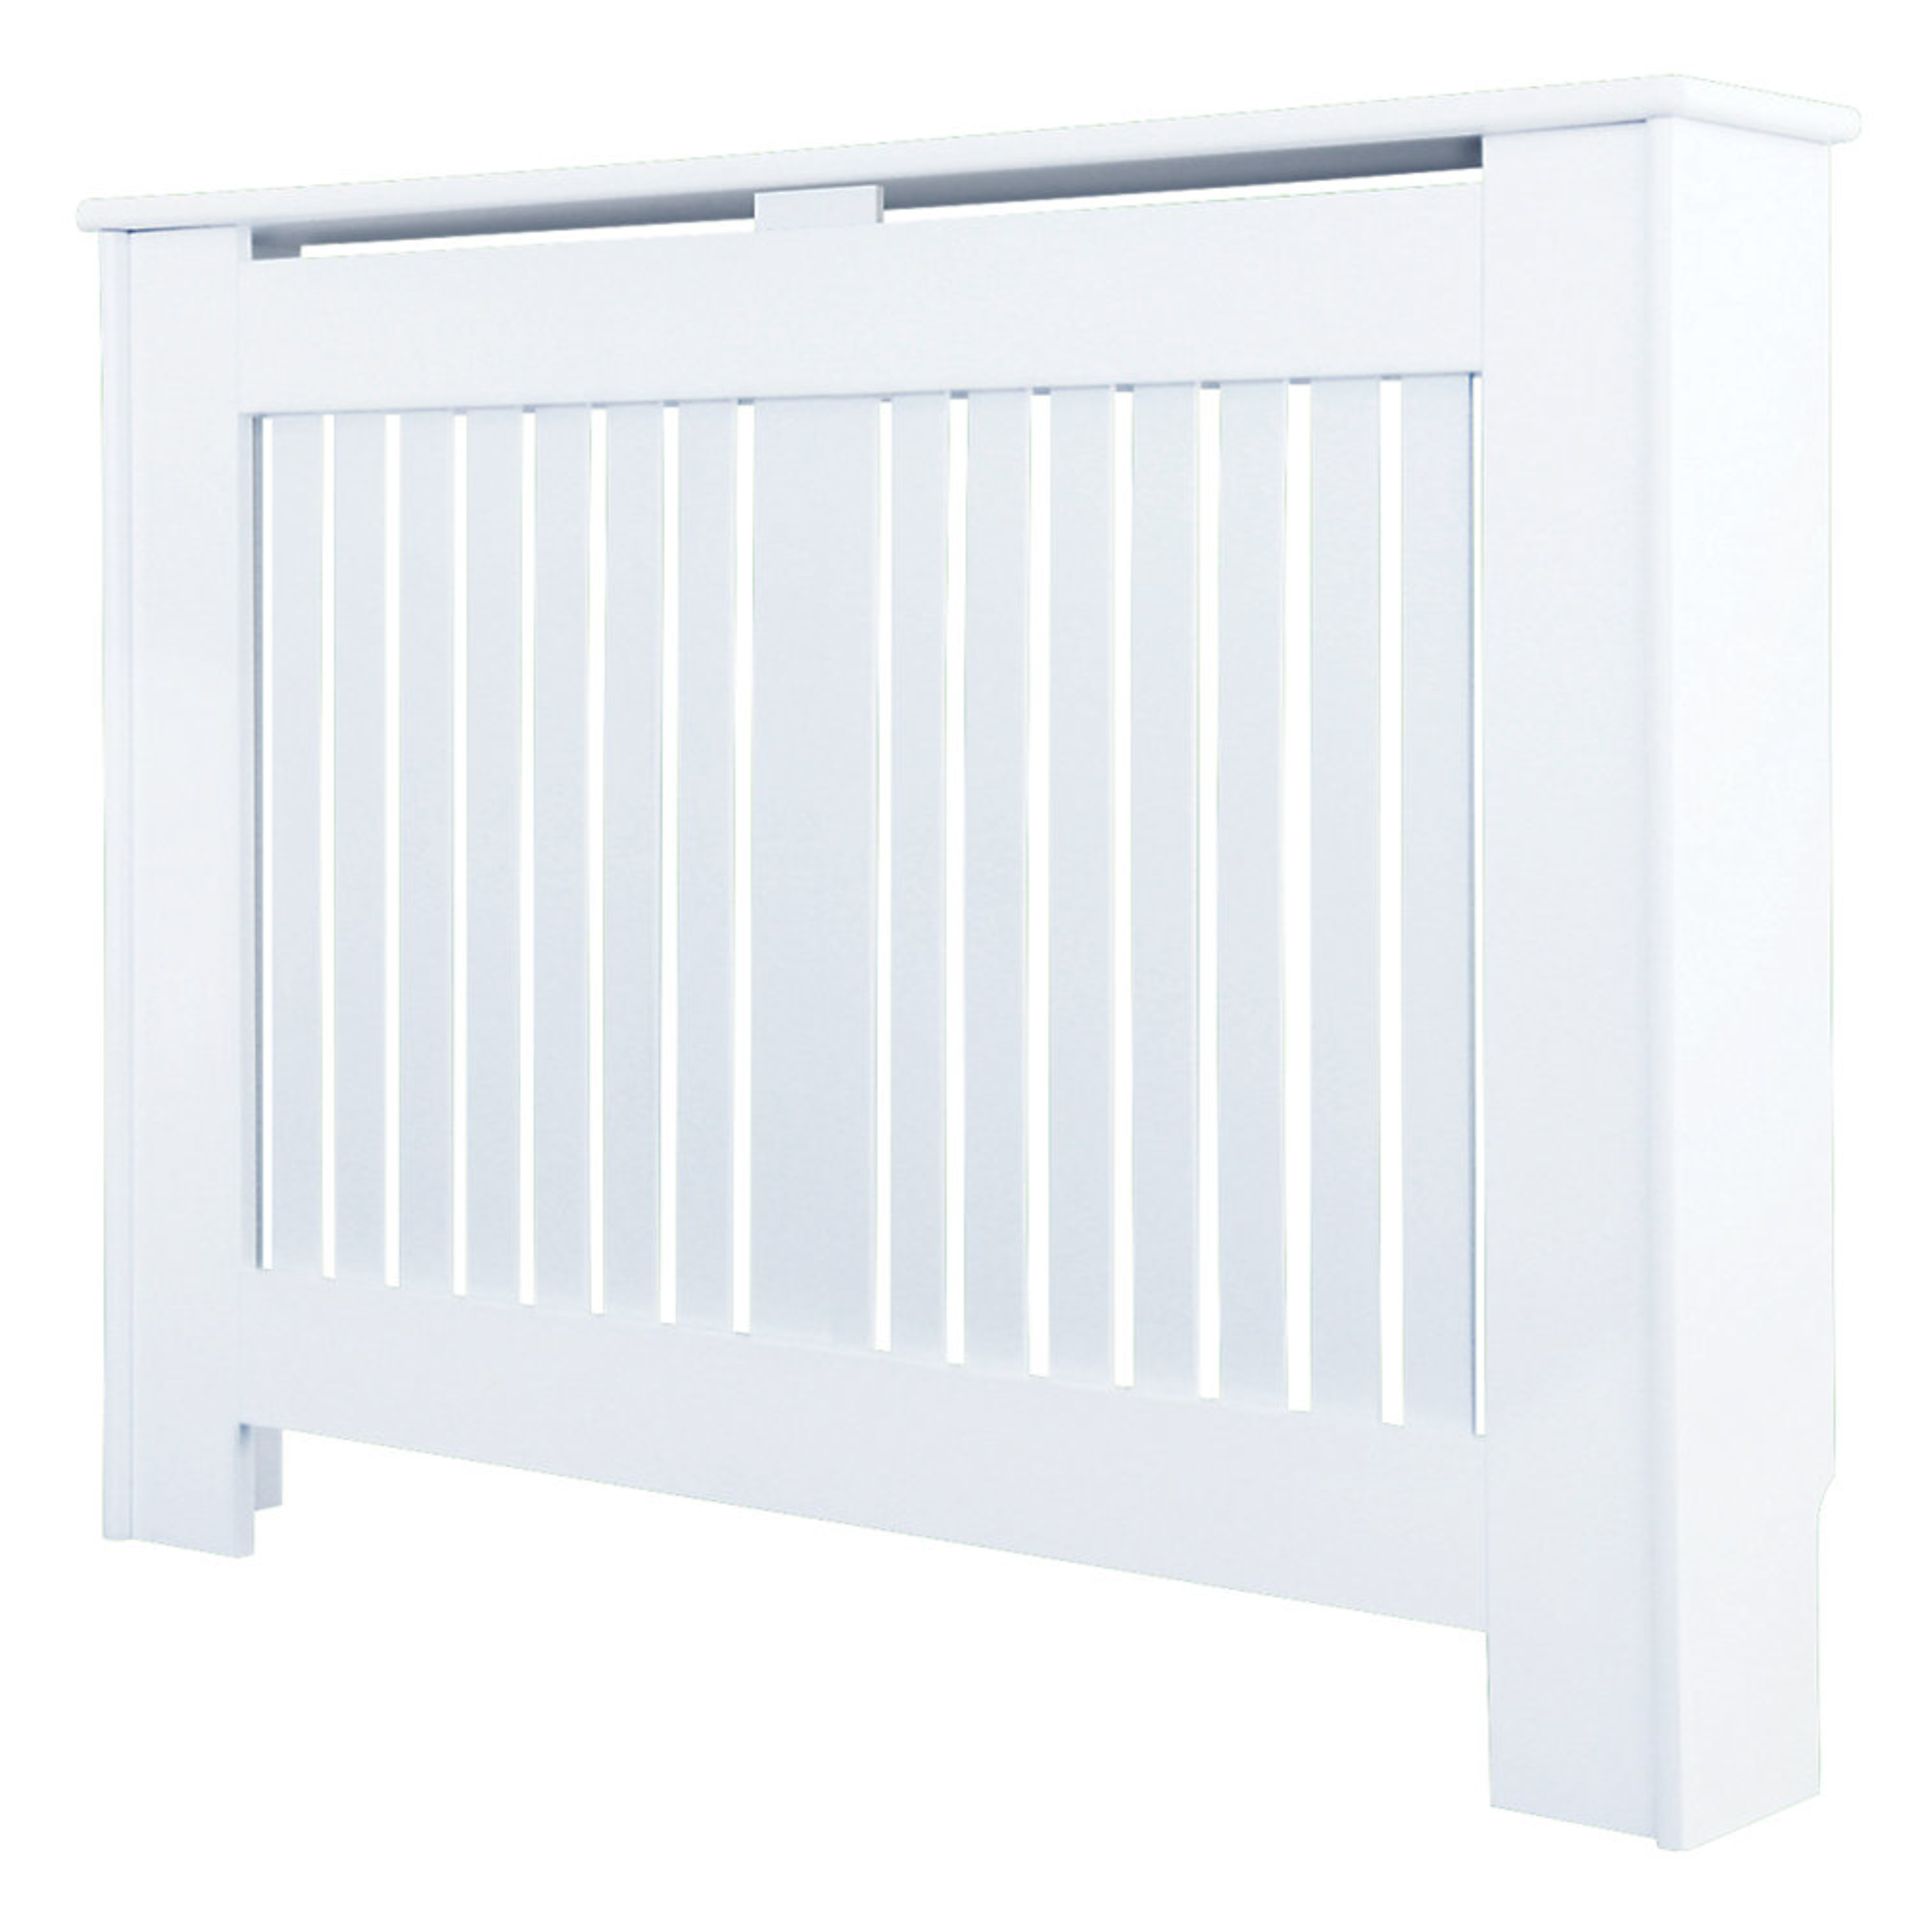 (UR78) 1020 X 180 X 800MM CONTEMPORARY KENSINGTON RADIATOR CABINET SMALL WHITE. RRP £99.99. I... - Image 2 of 3